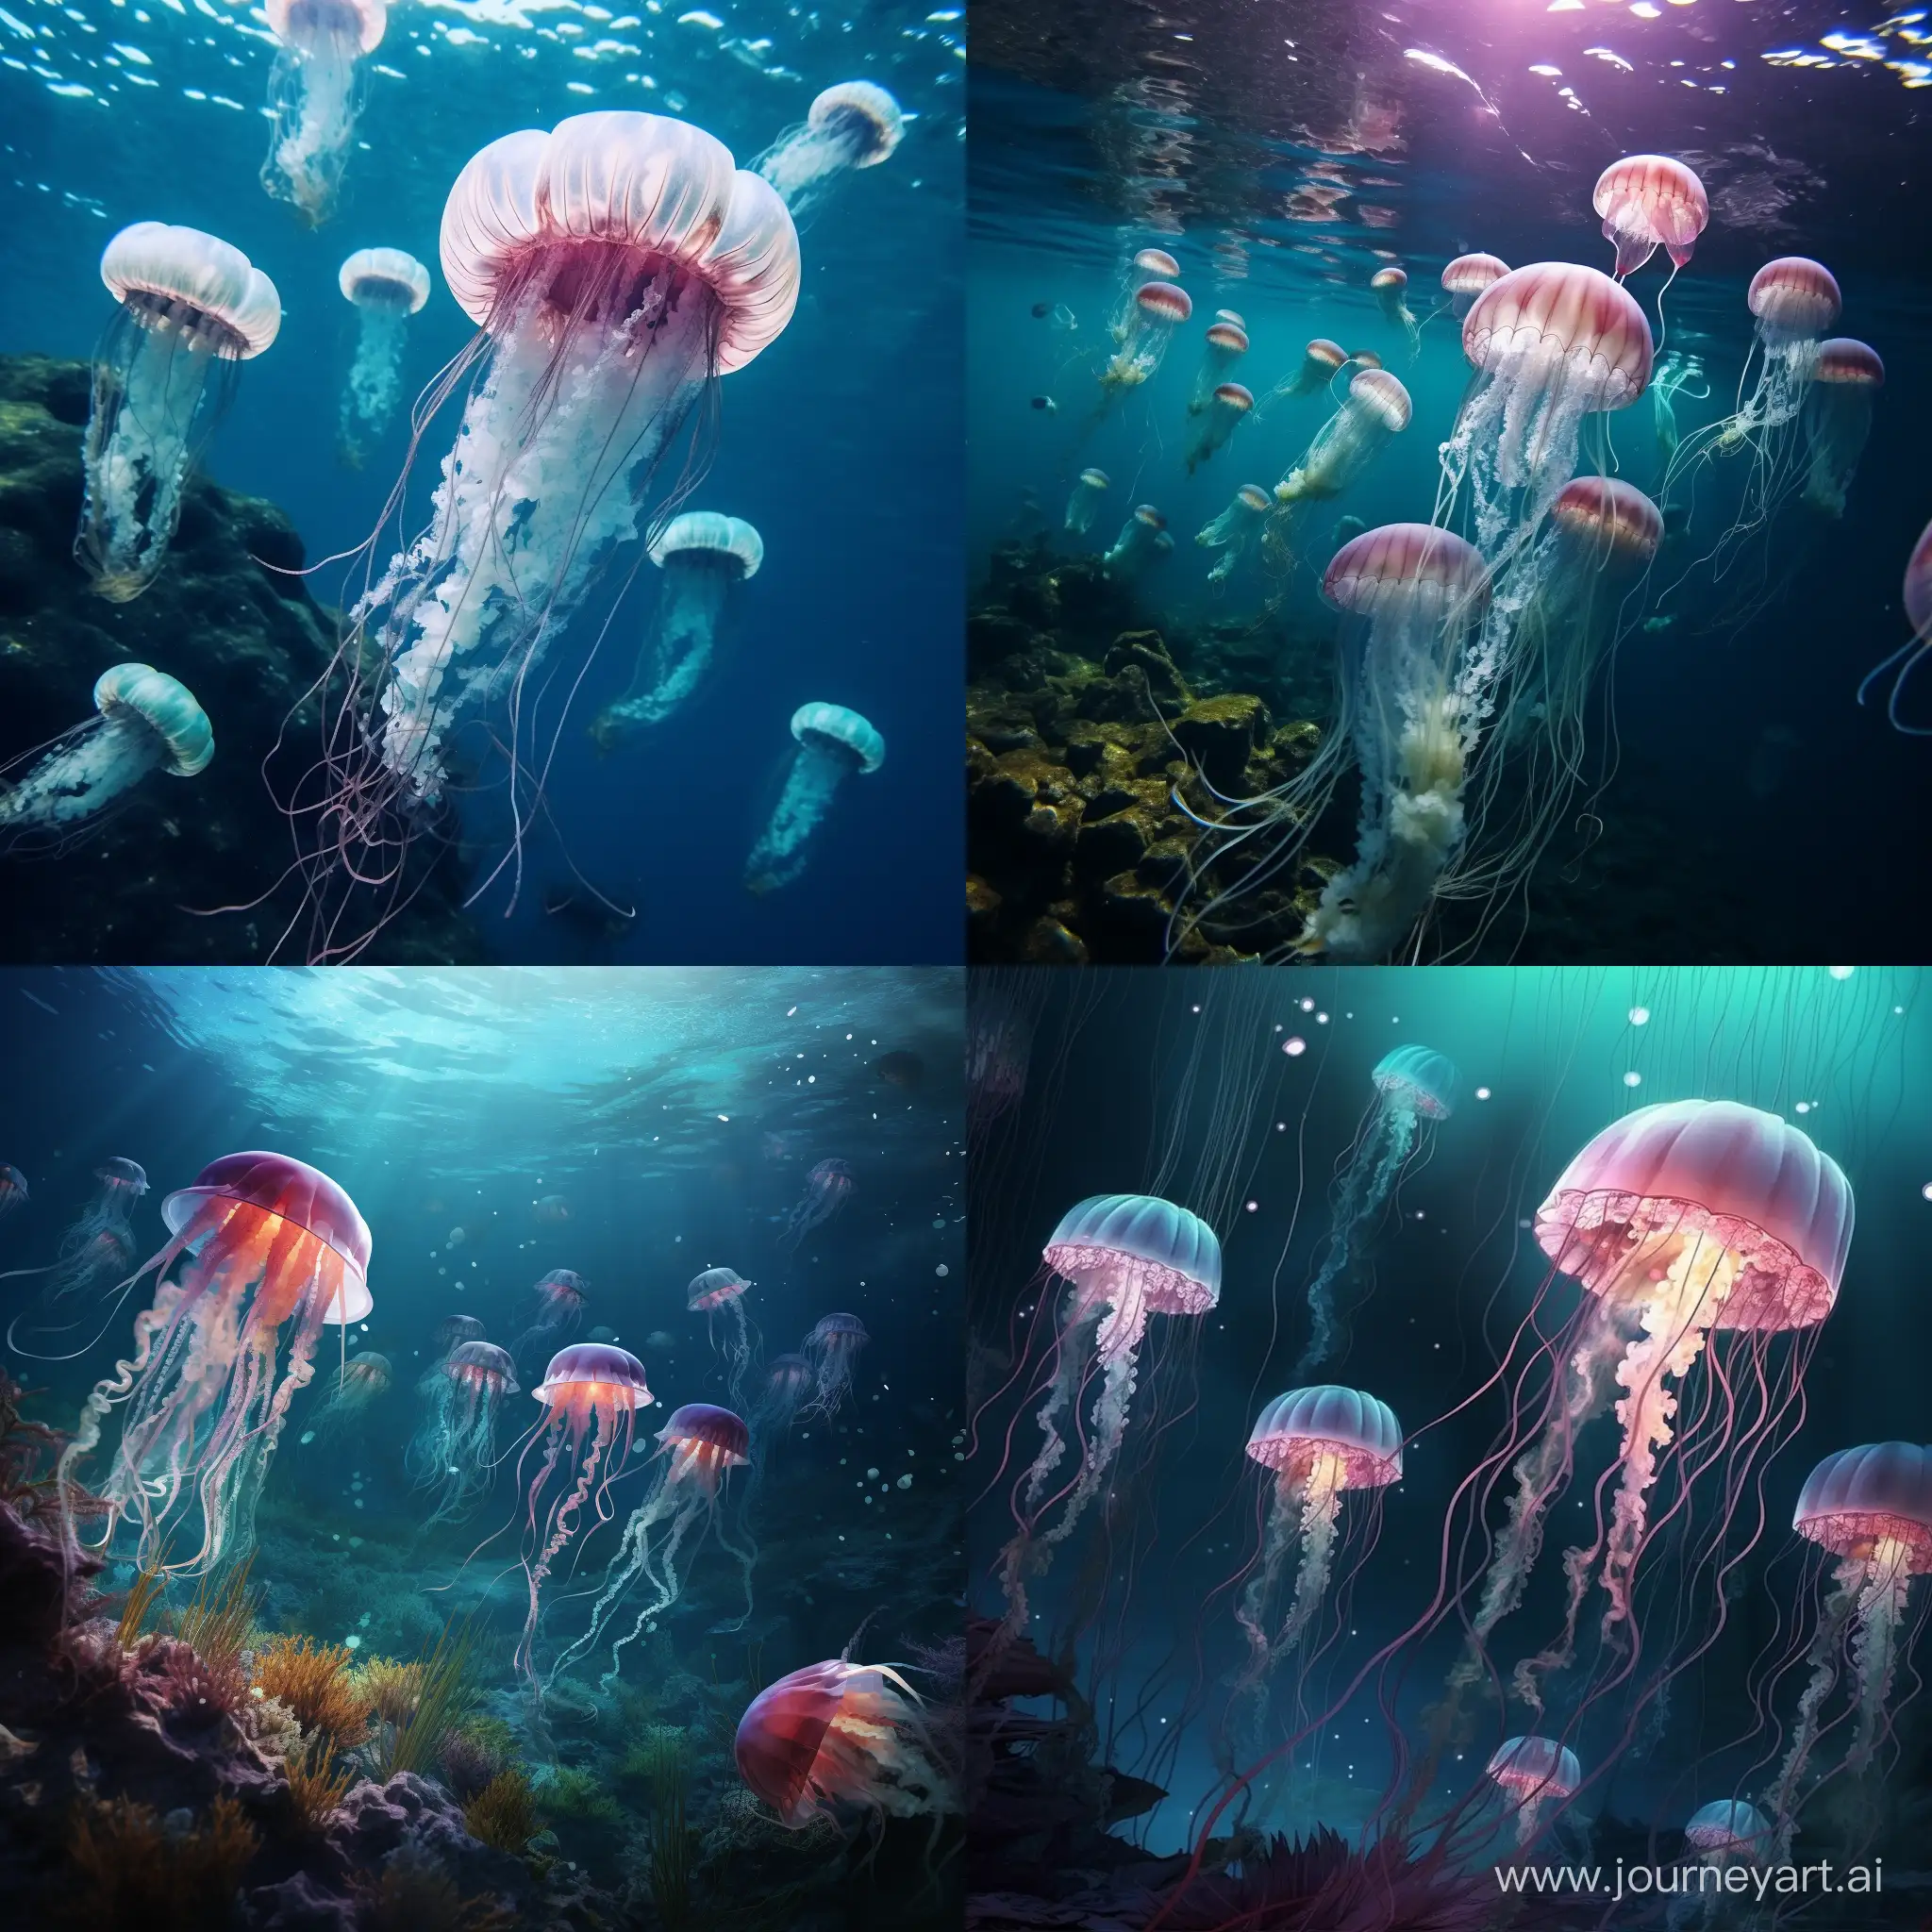 Vibrant-Sea-Life-Exquisite-Jellyfish-in-a-11-Artistic-Display